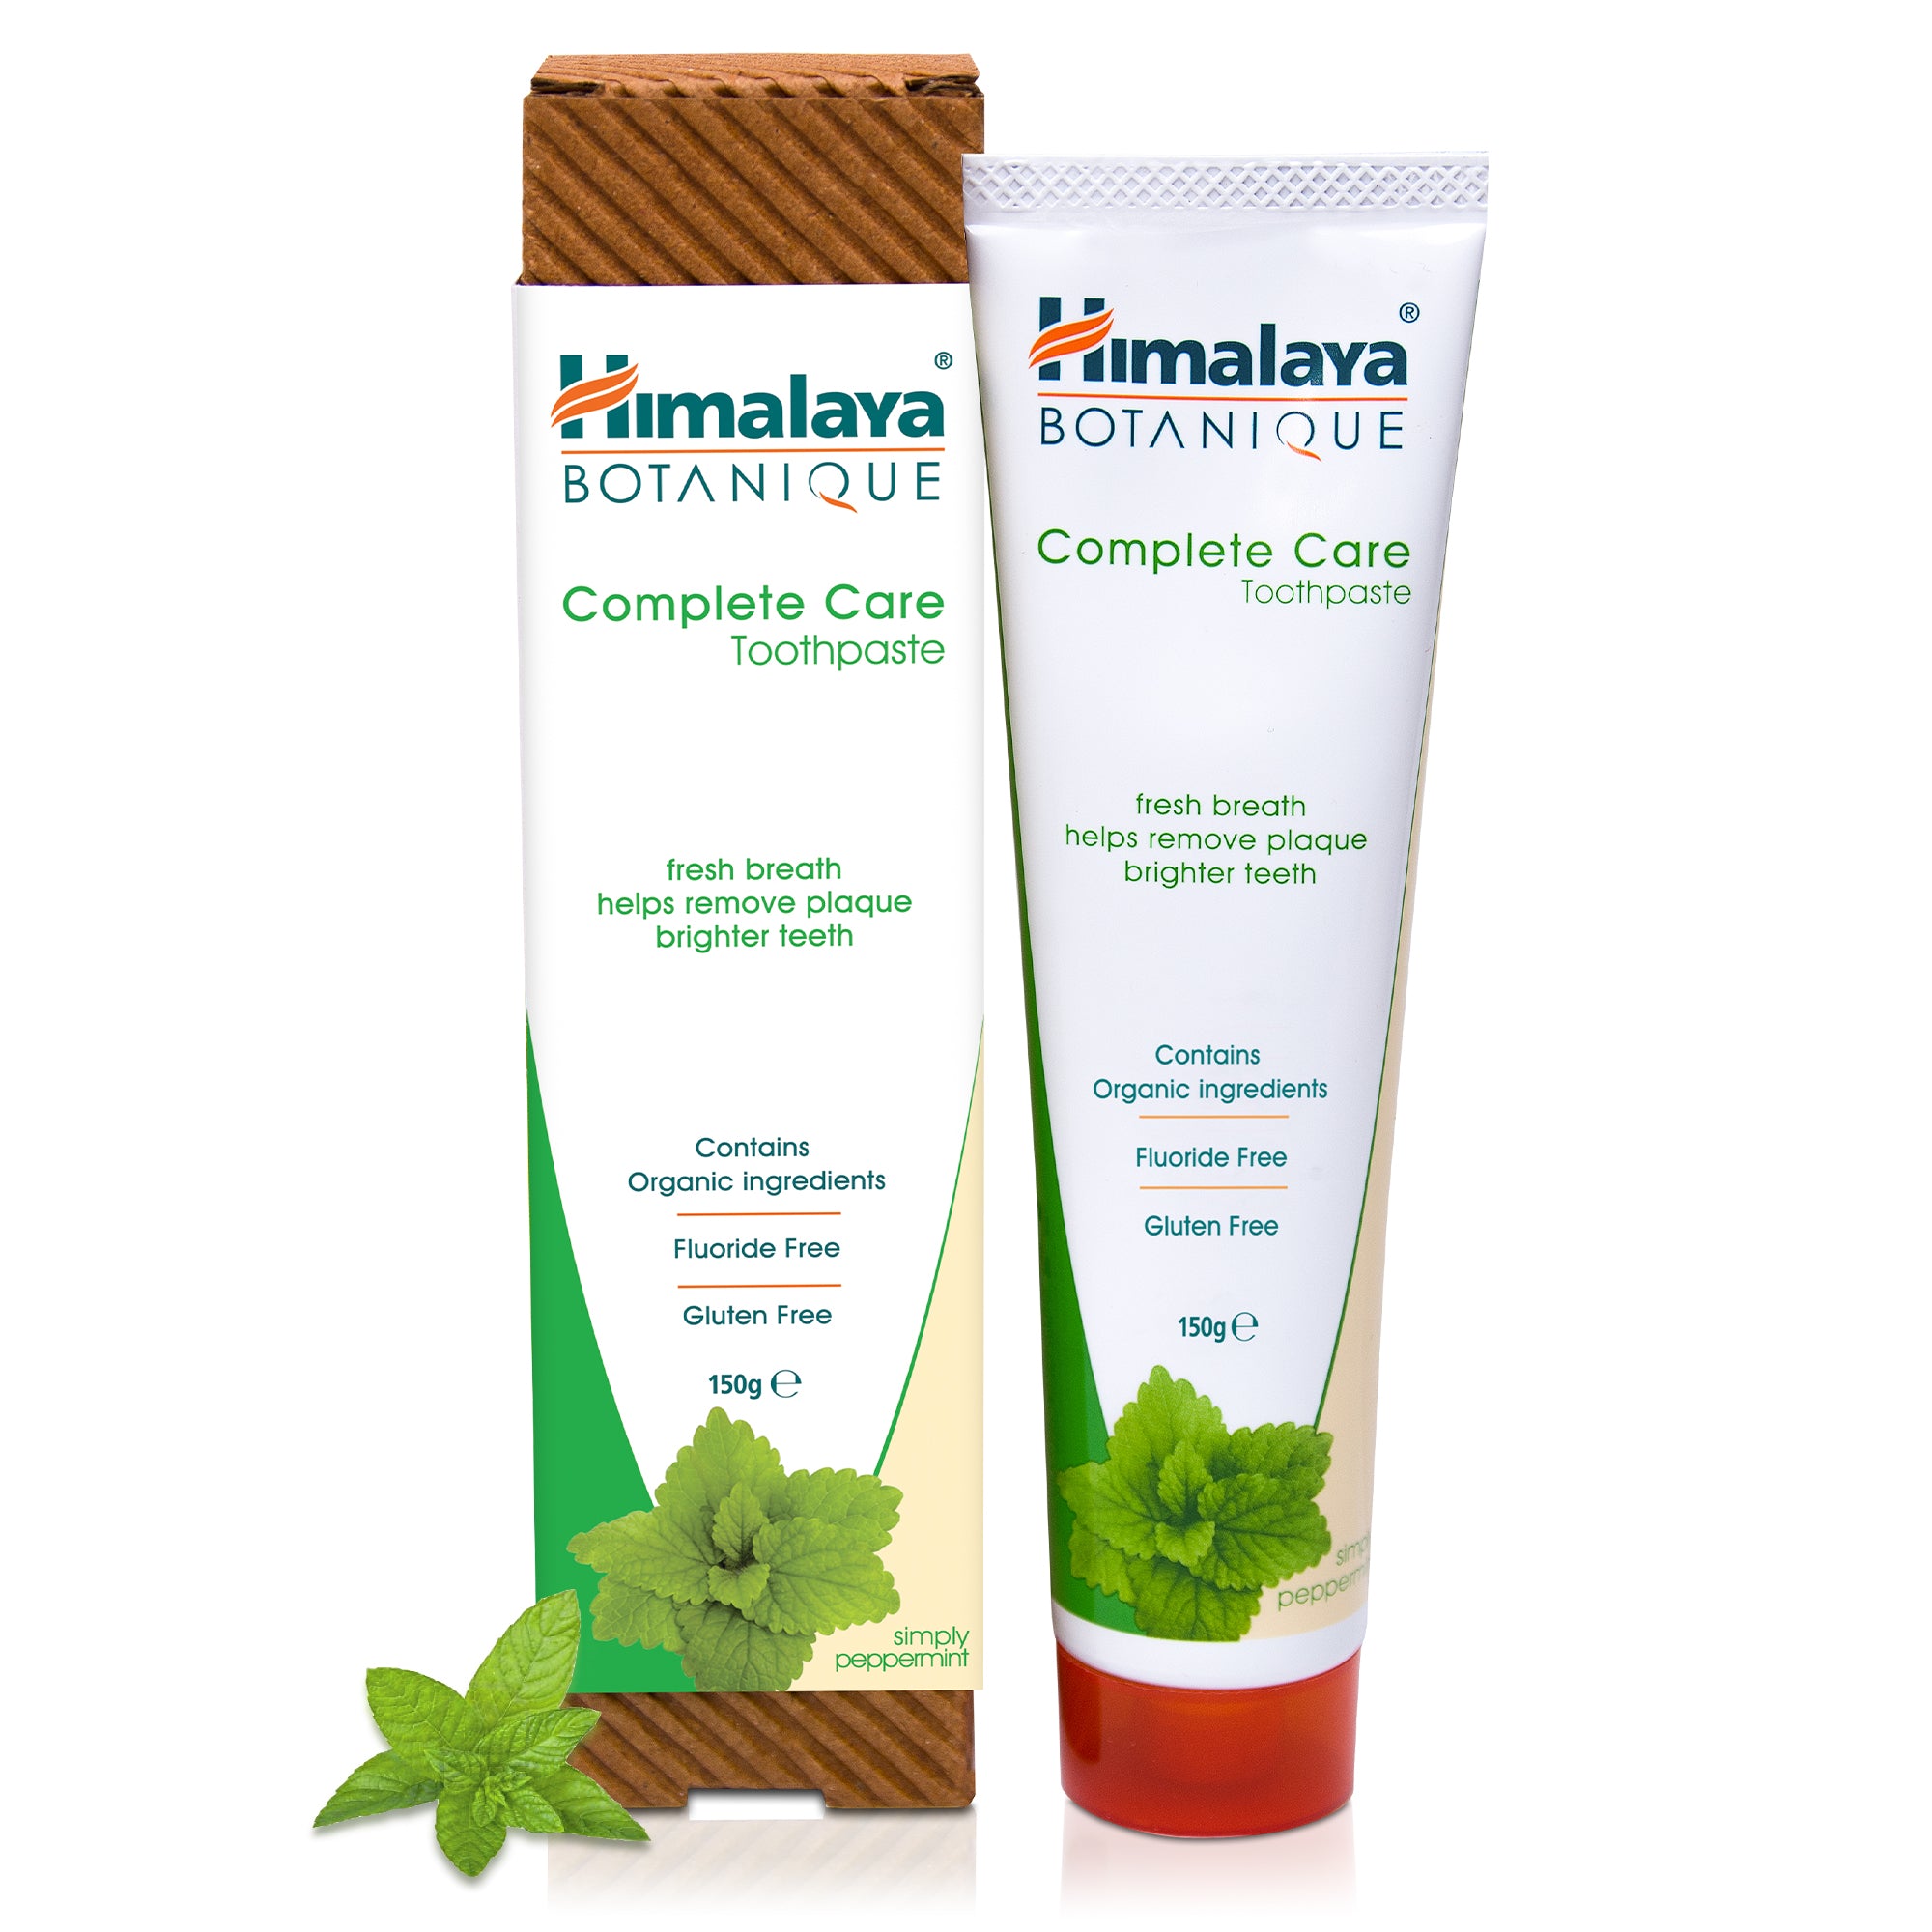 Himalaya BOTANIQUE Complete Care Toothpaste - Simply Peppermint 150g